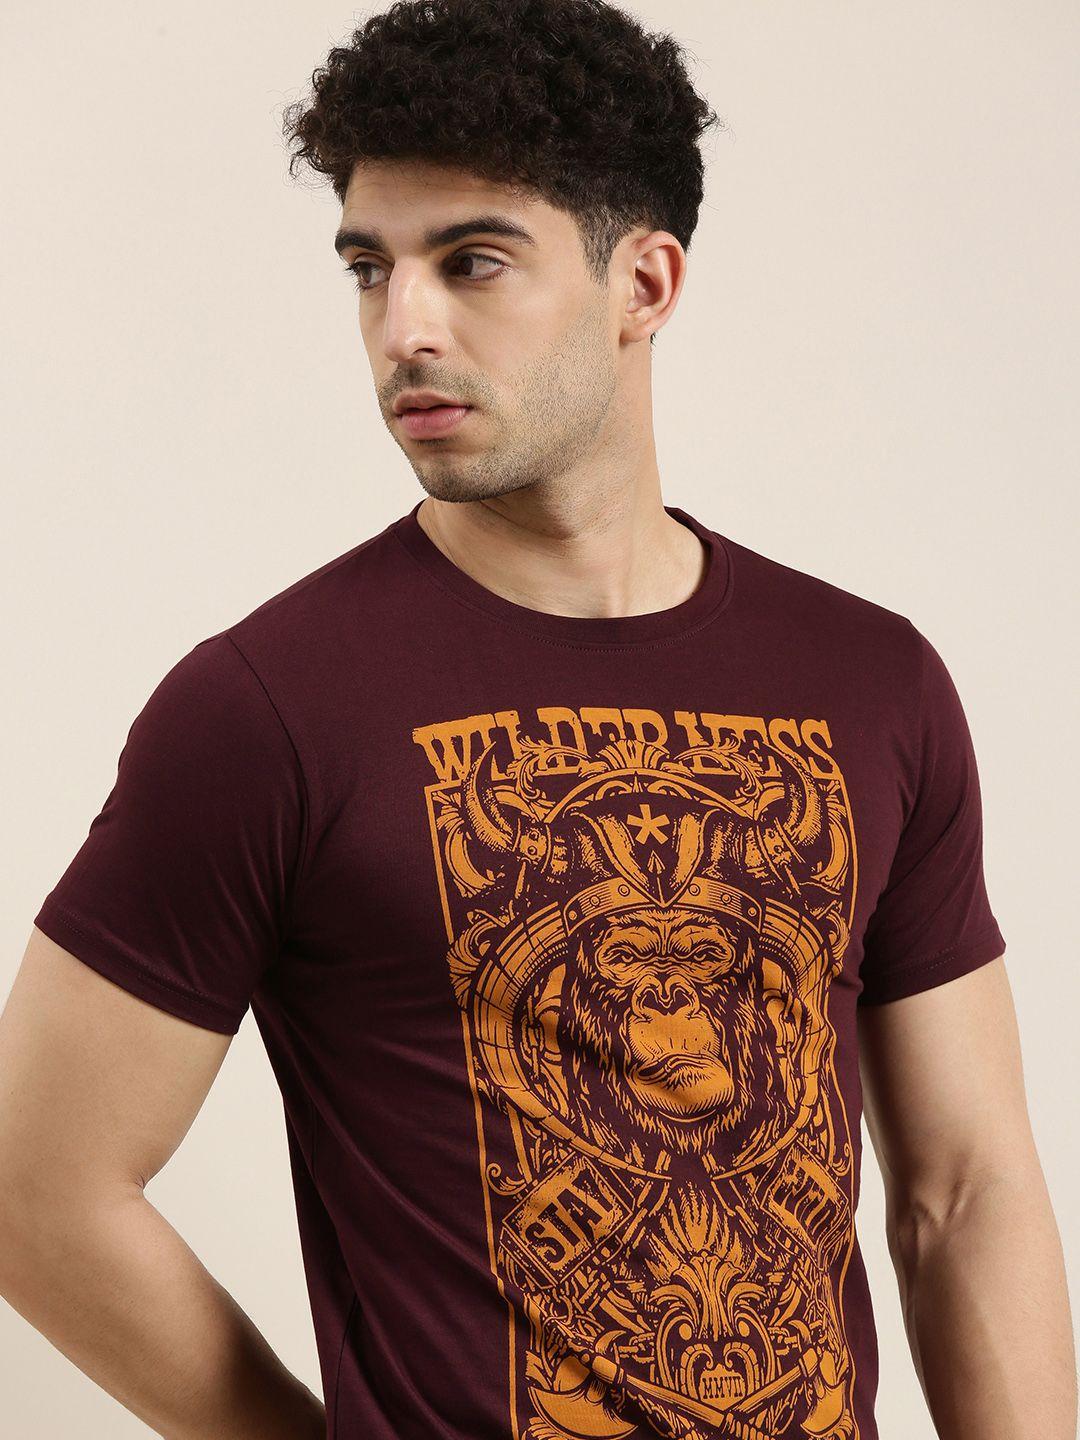 conditions-apply-men-burgundy--mustard-yellow-printed-round-neck-pure-cotton-t-shirt